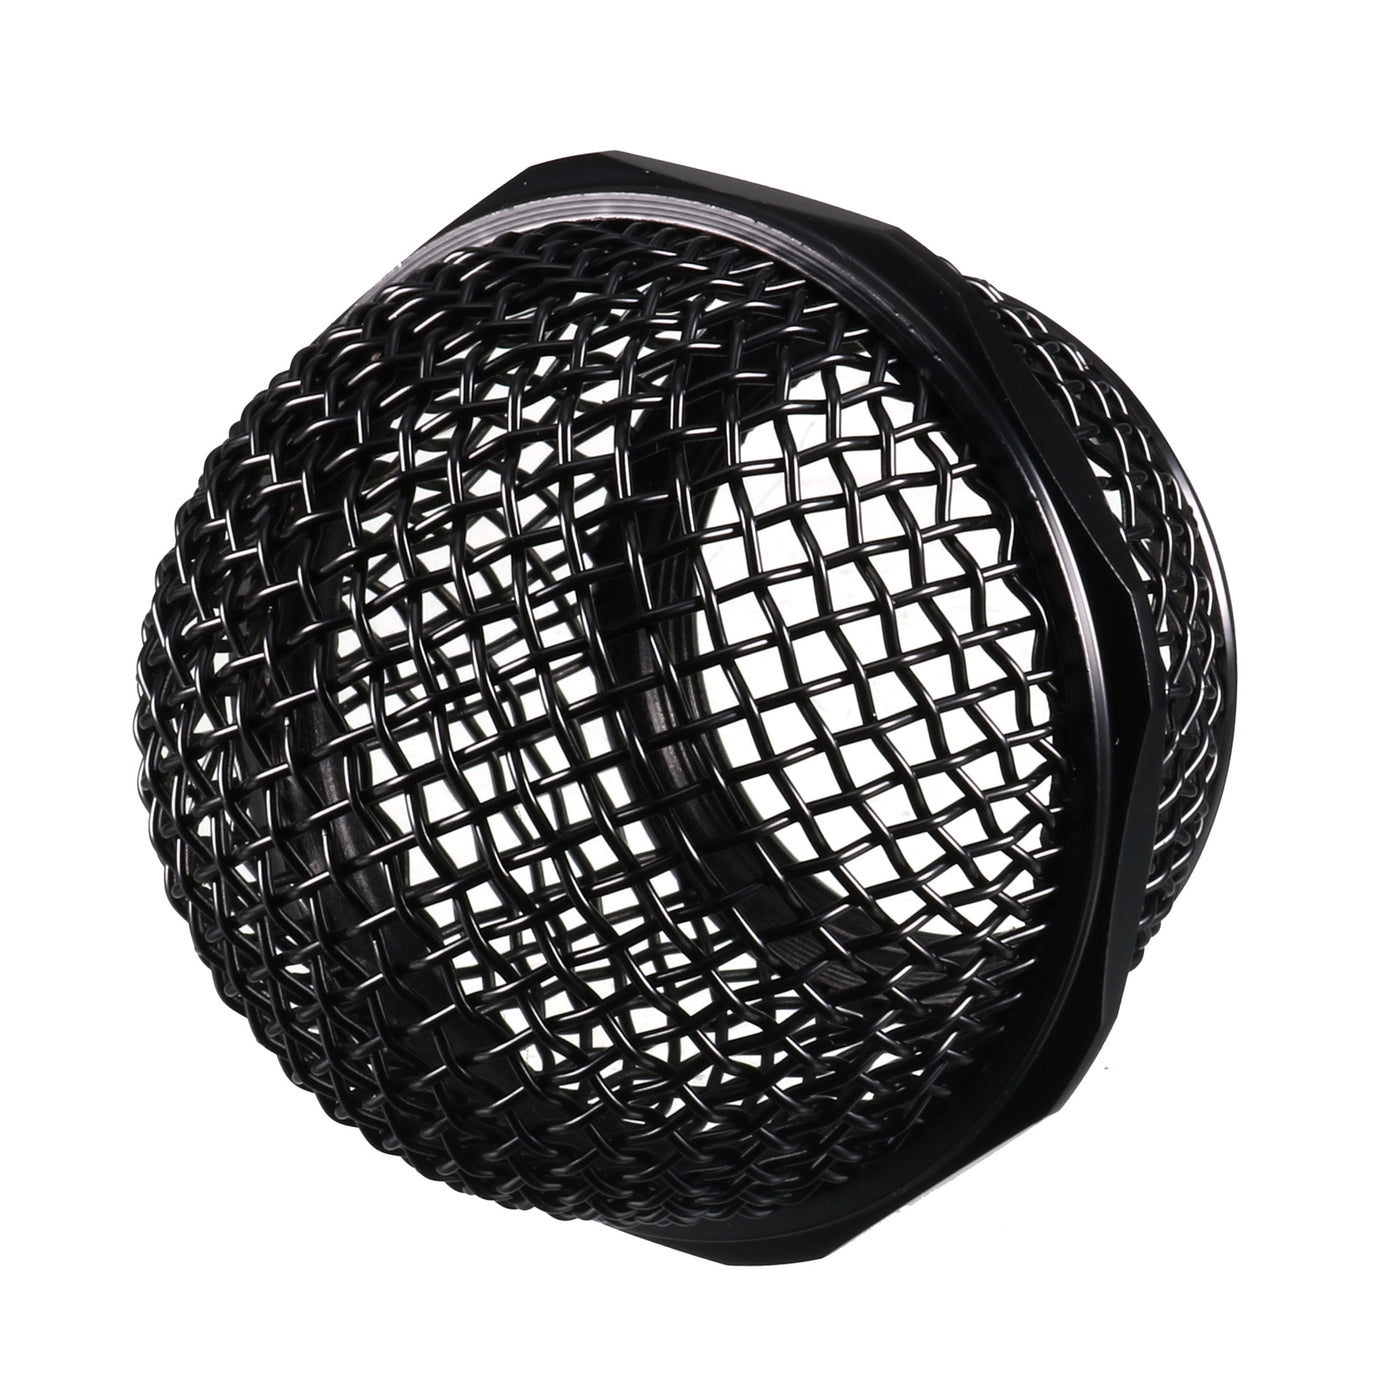 uxcell Uxcell Black Microphone Ball Head Mesh Grill Metal Windscreen with Inner Foam Filter for BETA58 BETA58A SM58LC SM58S SA-M30 SV100 UT2 PGX24 SLX2 SLX4